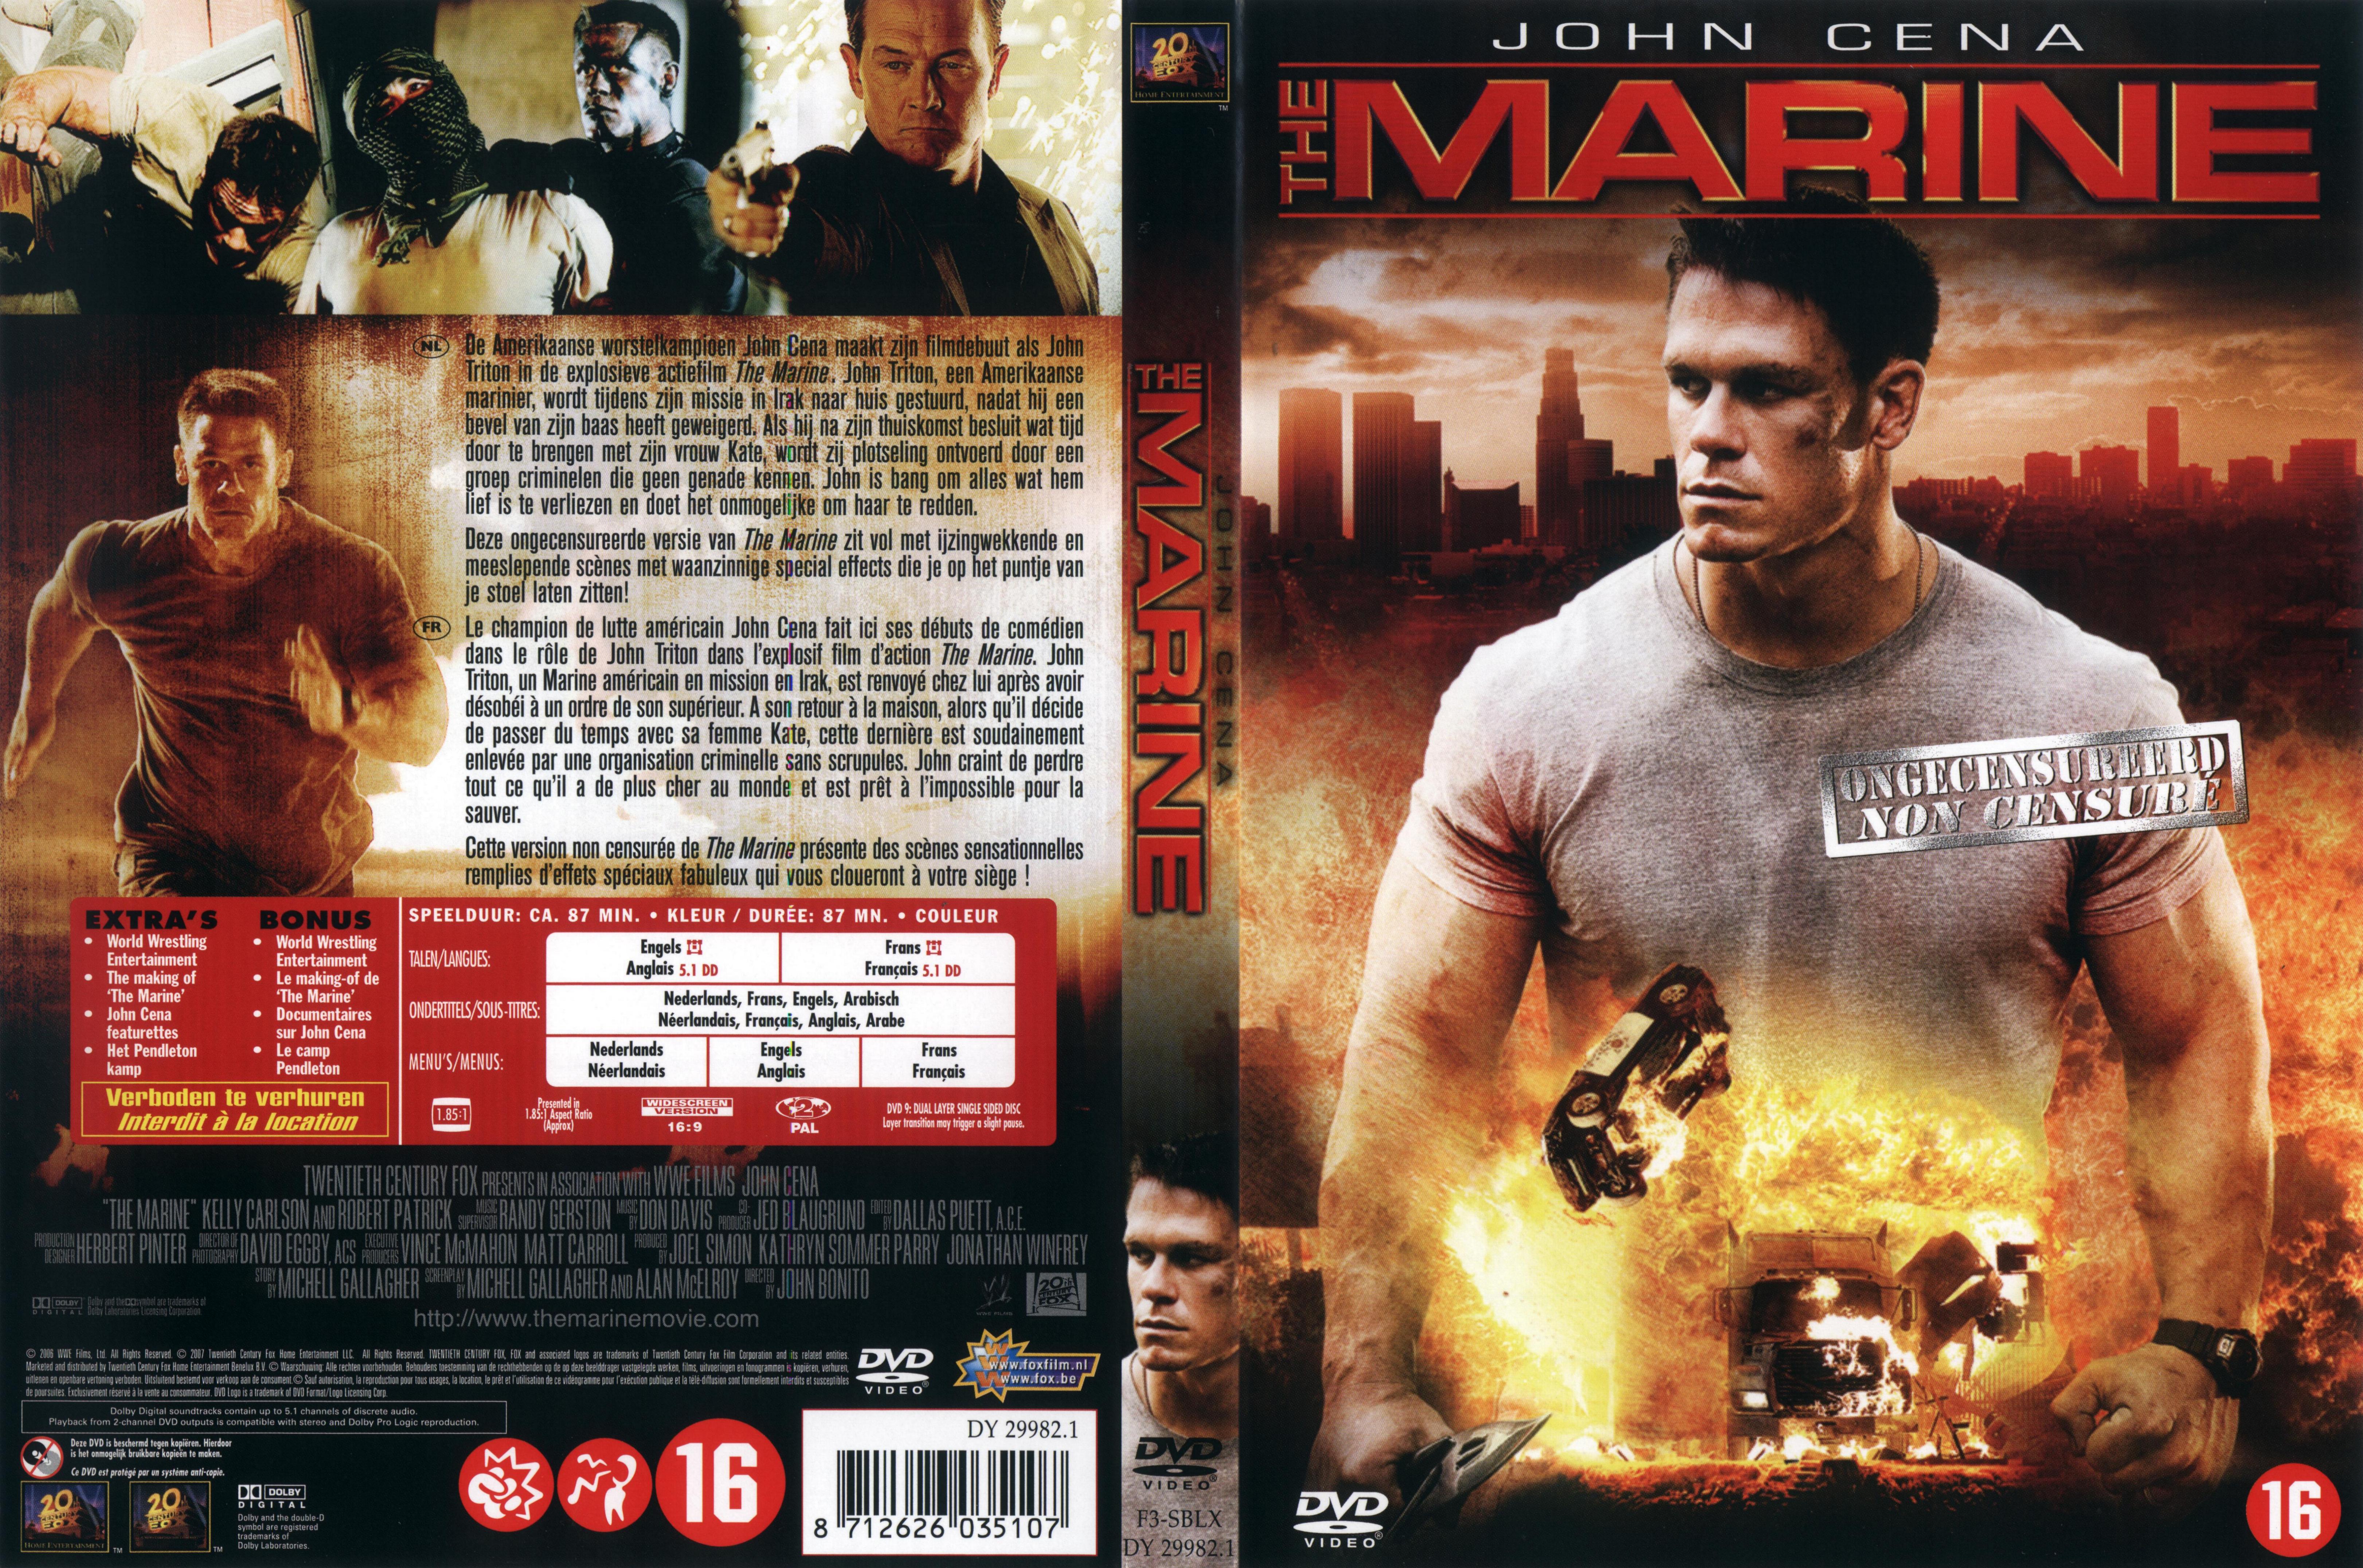 Jaquette DVD The marine